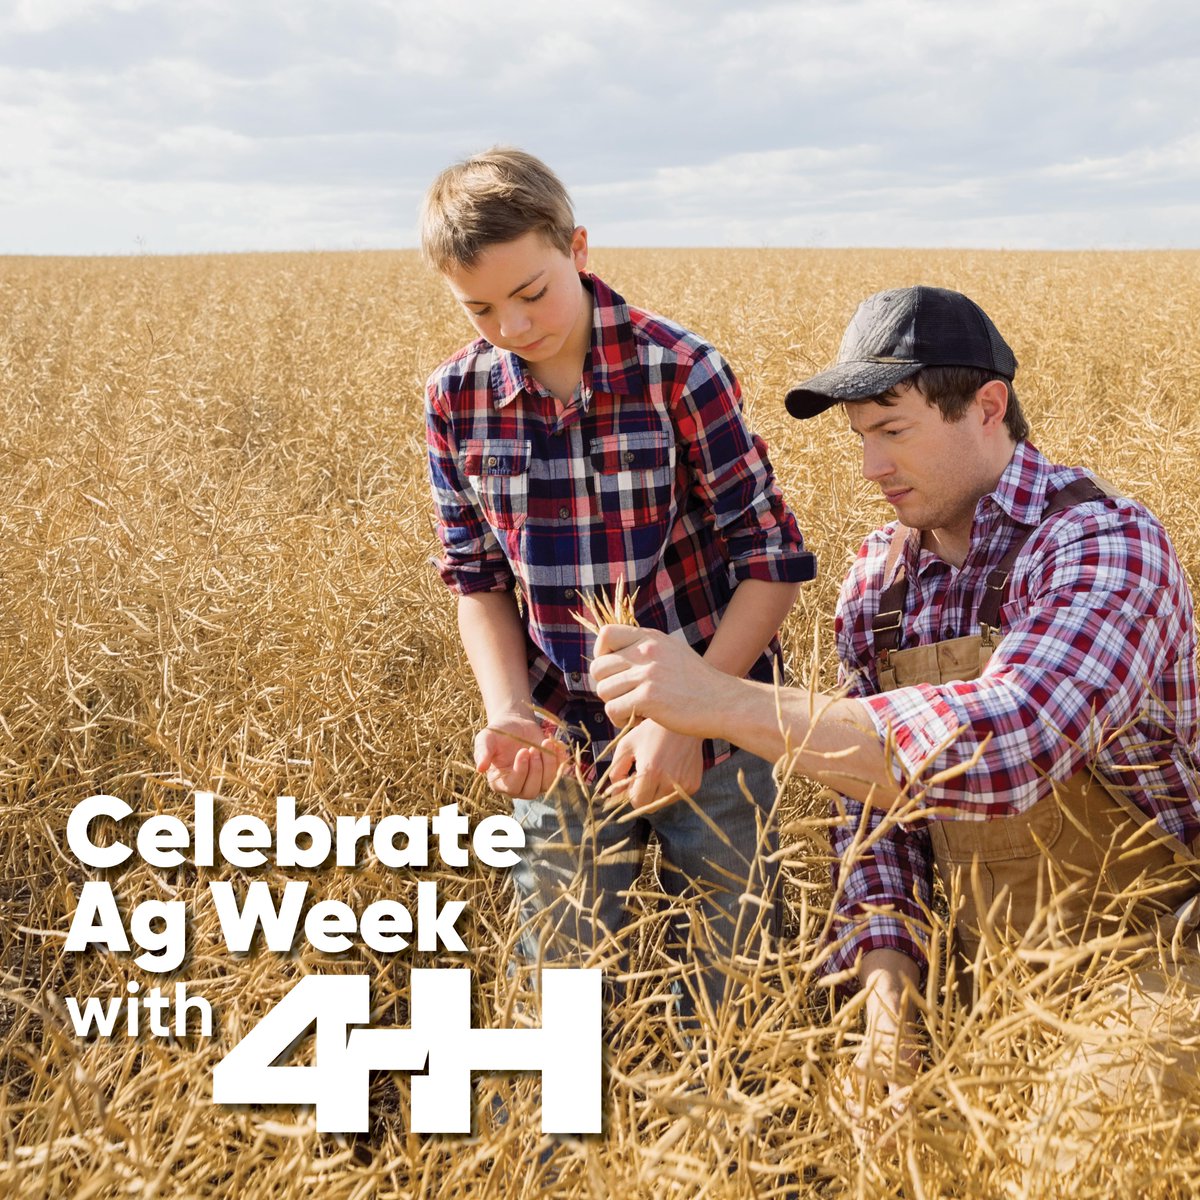 We're grateful to our donors and sponsors for empowering the next generation of agriculture leaders during Ag Week and beyond. Thank you for investing in our youth and the future of agriculture! @Bayer4CropsUS @corteva @NutrienLTD @SaputoInc #ThankYou #AgWeek 🌻#Opportunity4All